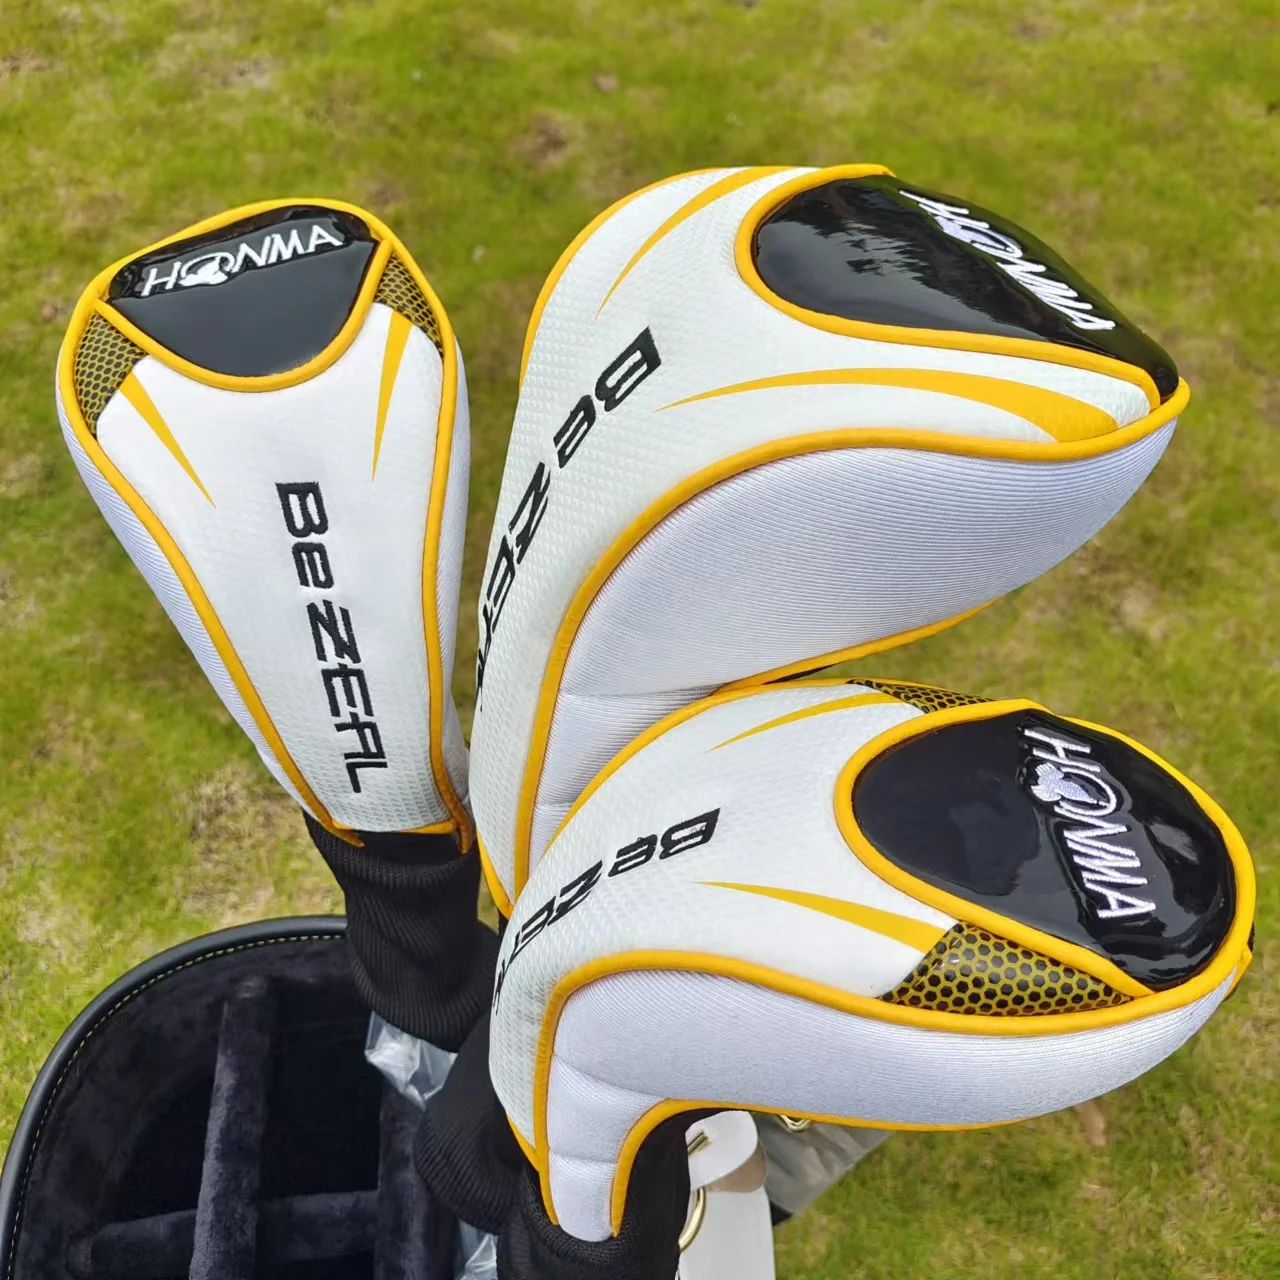 HONMA Golf Clubs HONMA Bezeal 525 Series Men's Golf Drivers Fairway Wood Sets Delivery Head Cover